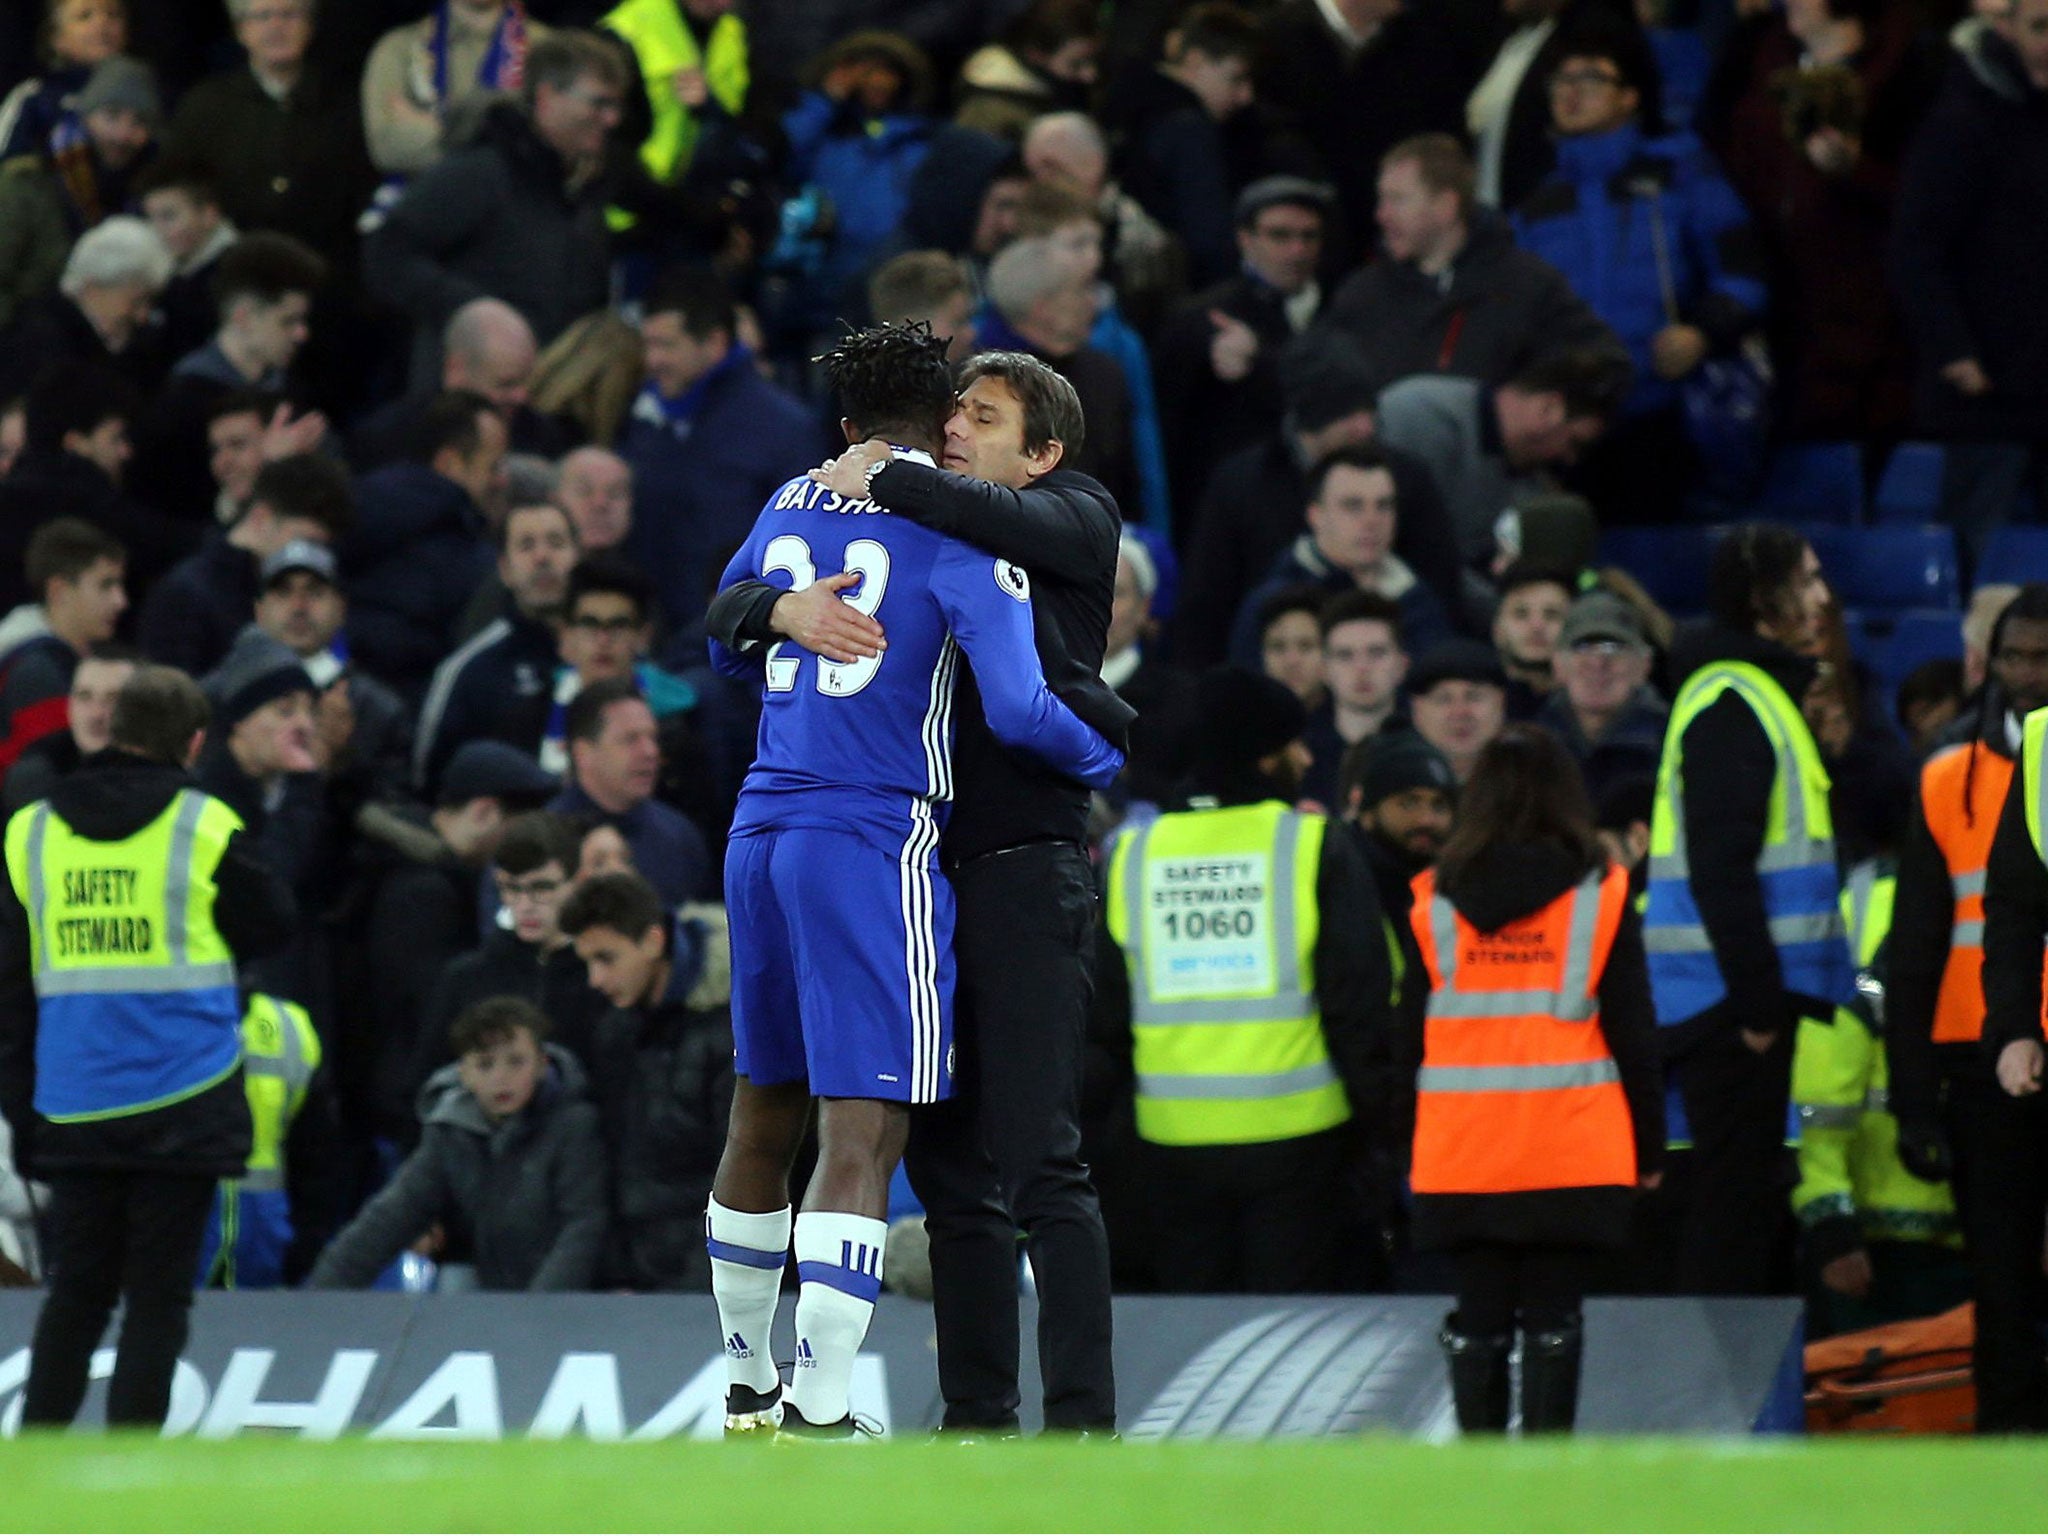 Antonio Conte embraces Michy Batshuayi after he failed to touch the ball in Chelsea's 3-0 win over Bournemouth